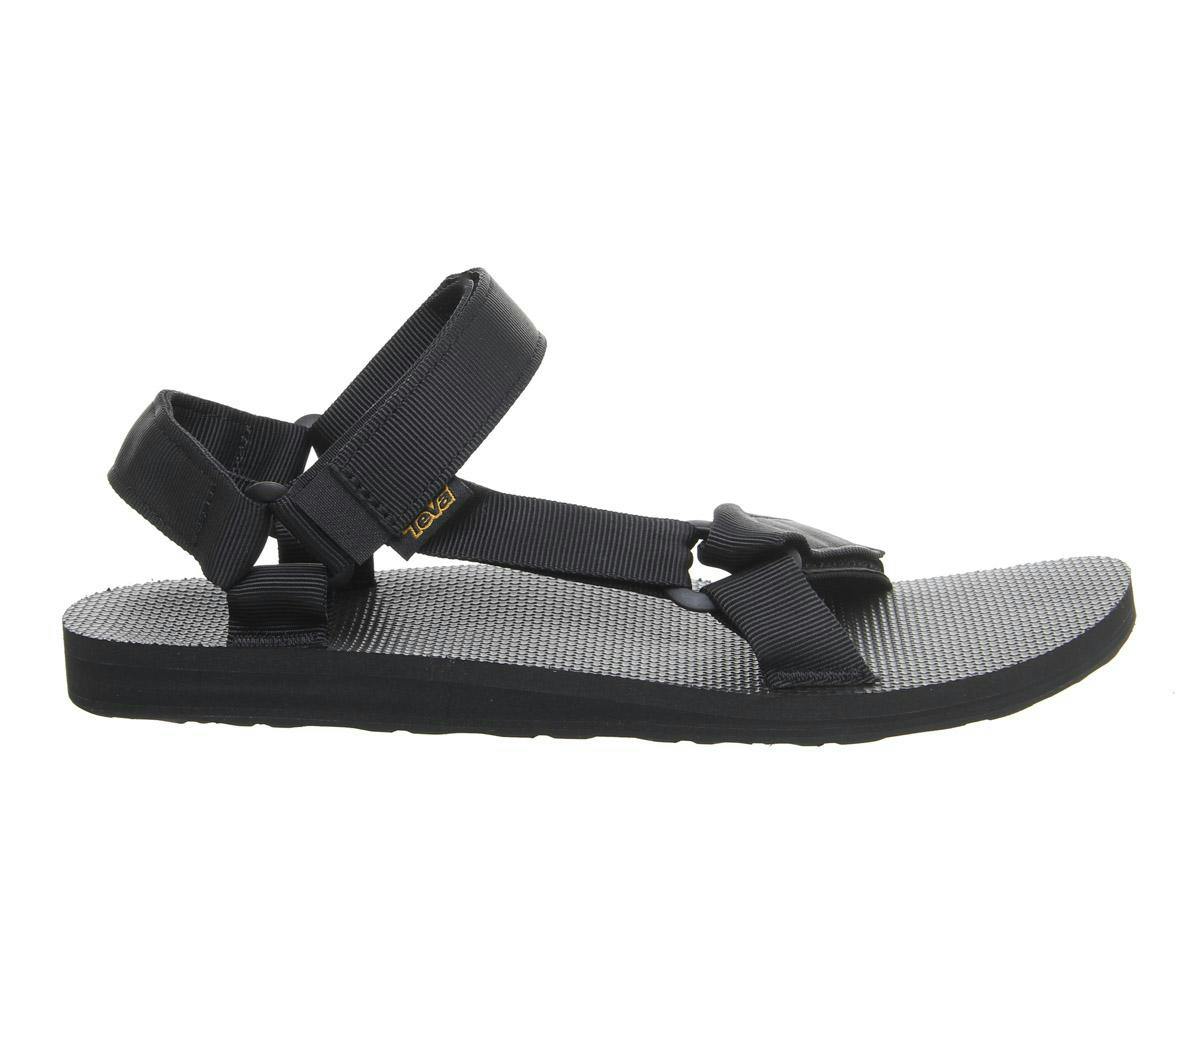 Teva's £40 sandals named the hottest shoe in the world